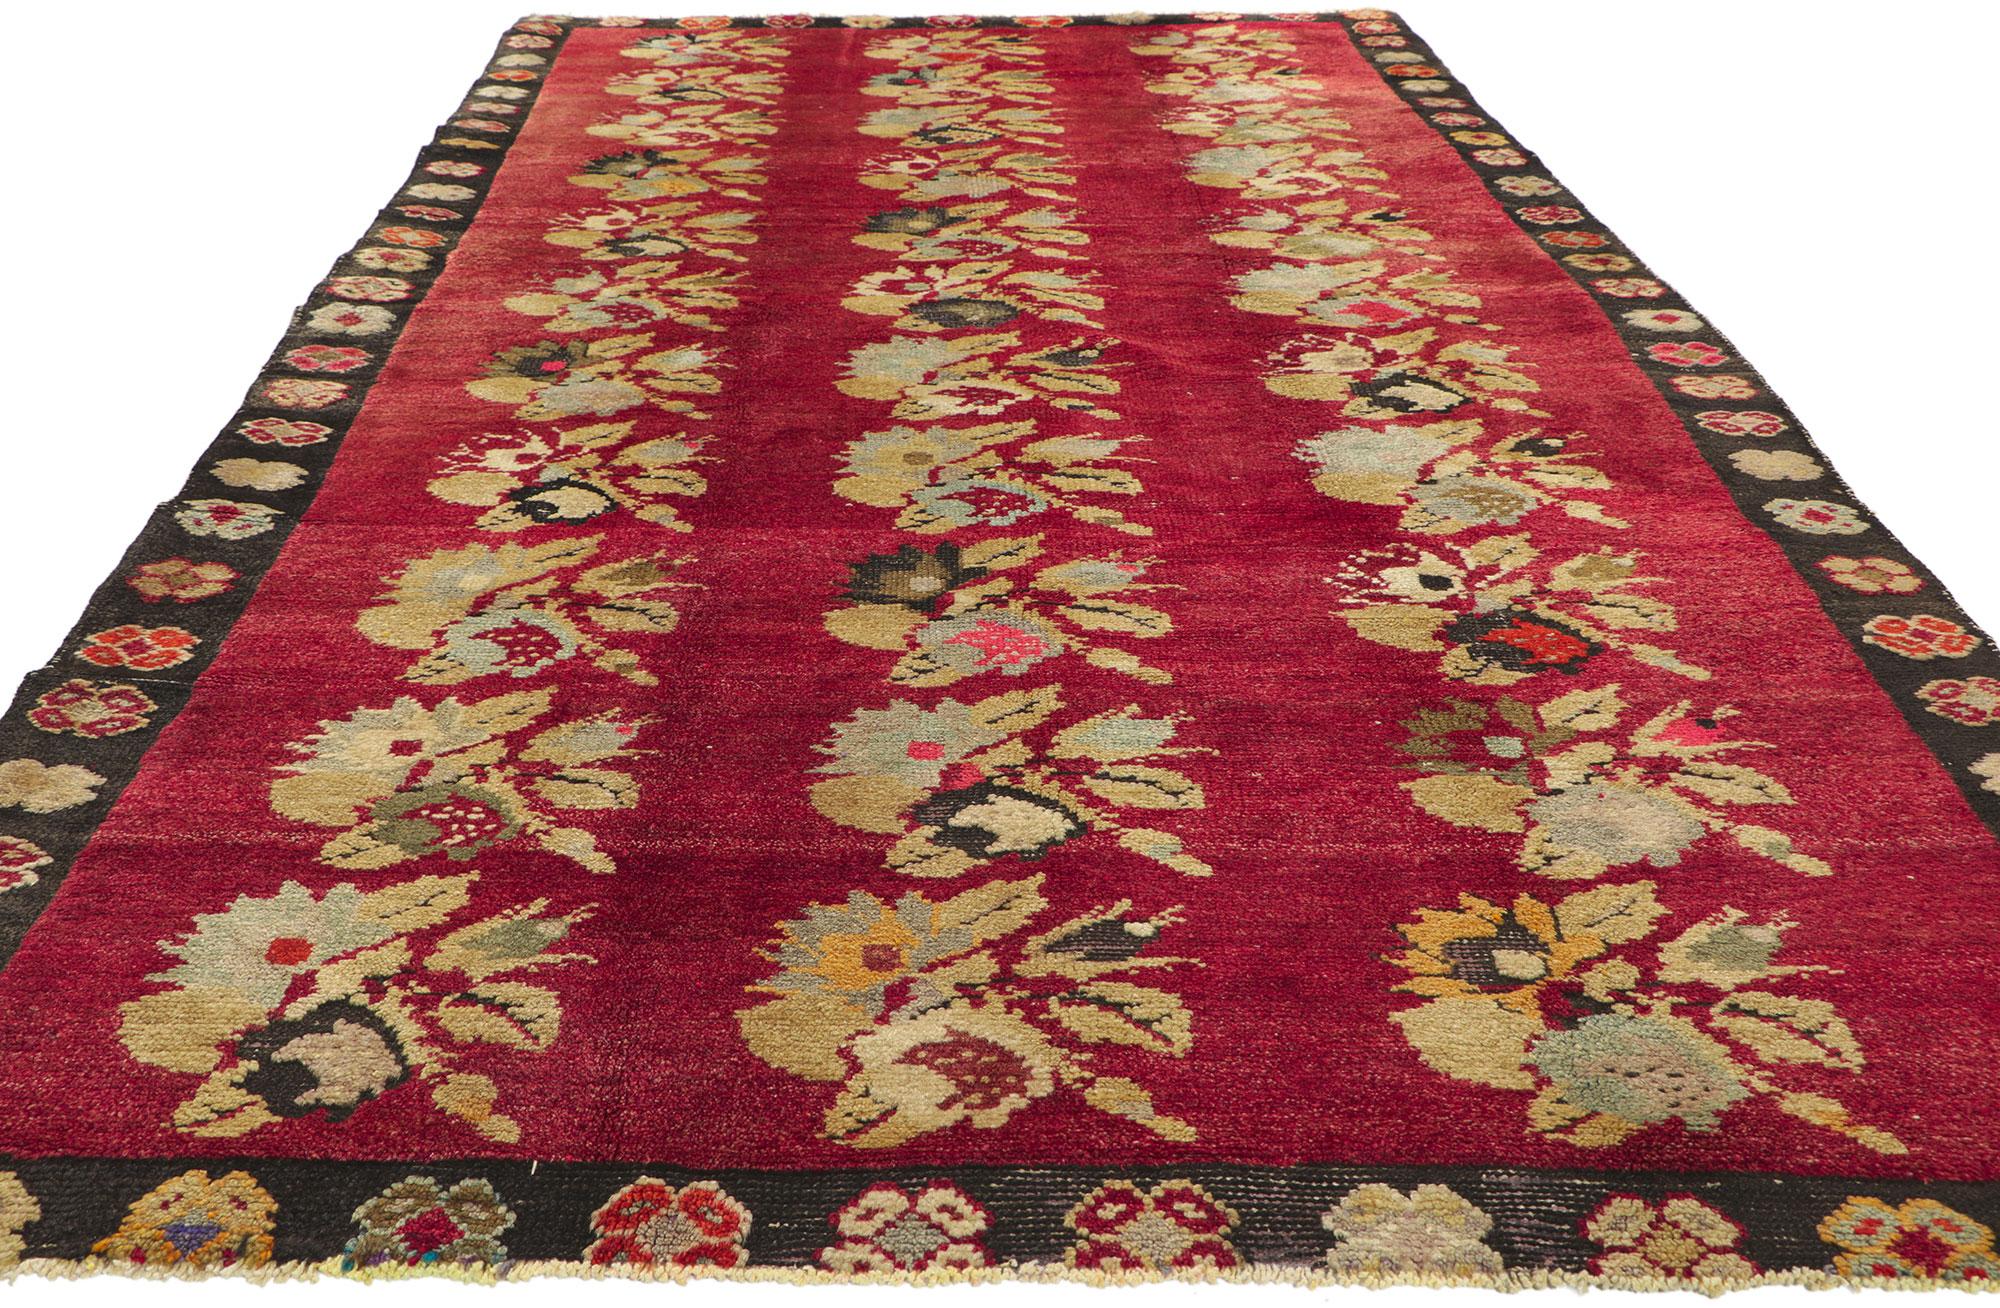 Wool Vintage Red Turkish Oushak Rug with Lively Earth-Tone Colors For Sale